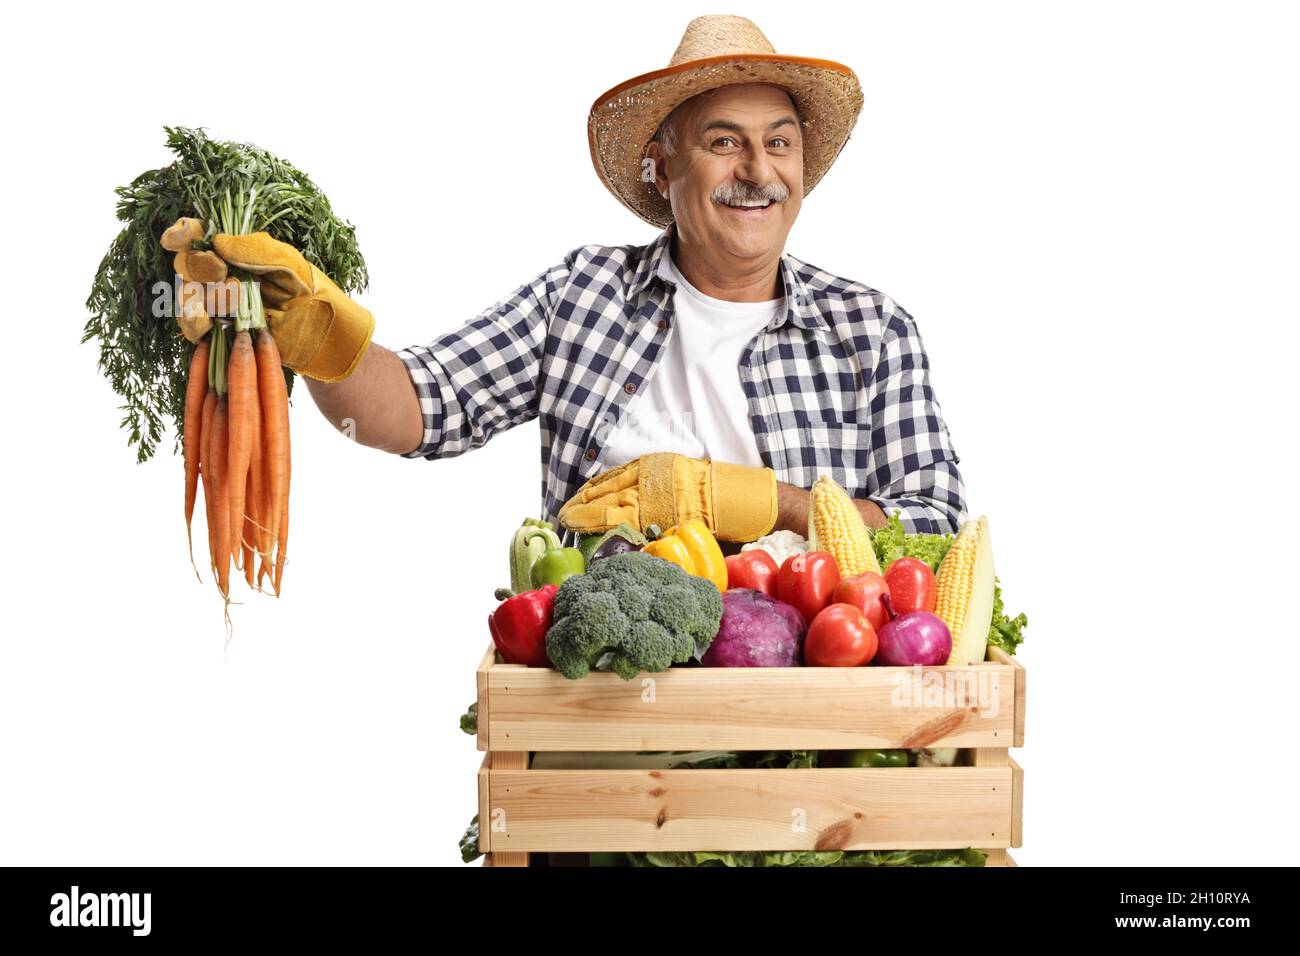 Mature farmer leaning on a crate and holding carrots isolated on white background Stock Photo